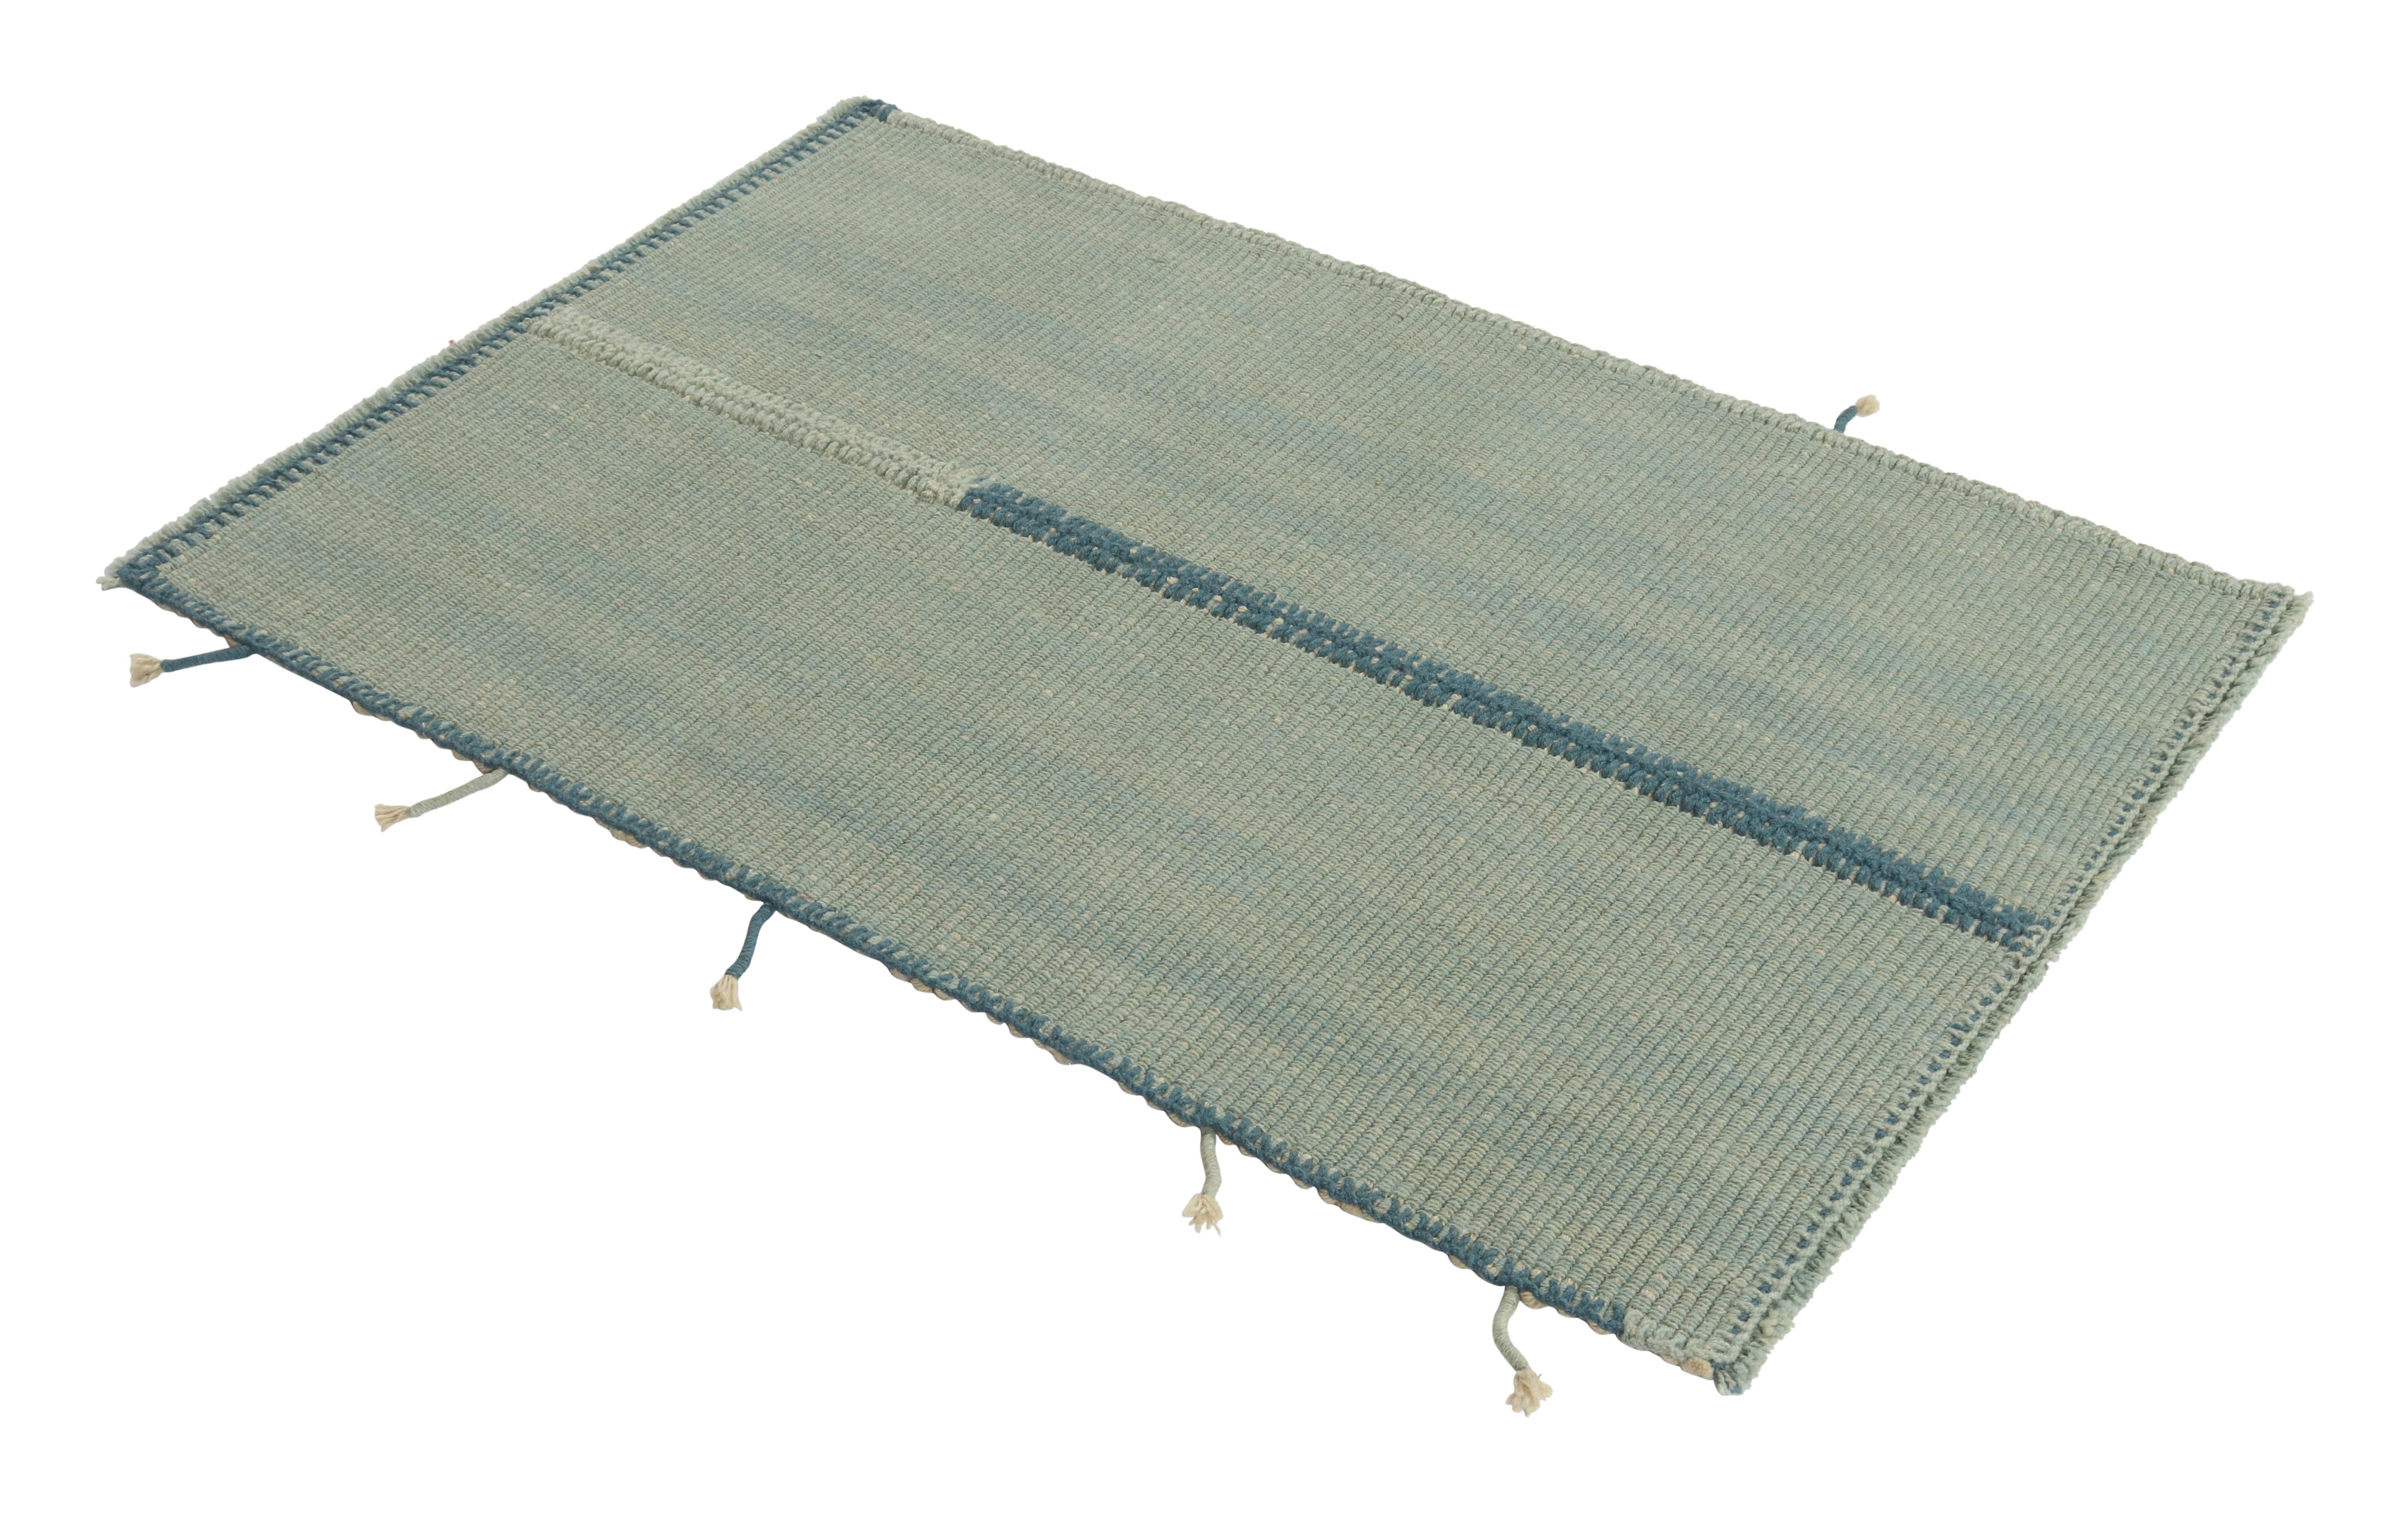 Handwoven in wool, a gift-sized 3x4 Kilim from an innovative new contemporary flat weave collection by Rug & Kilim.
On the Design:
The “Rez Kilim” connotes a modern take on classic panel weaving—this edition enjoying seafoam with blue and